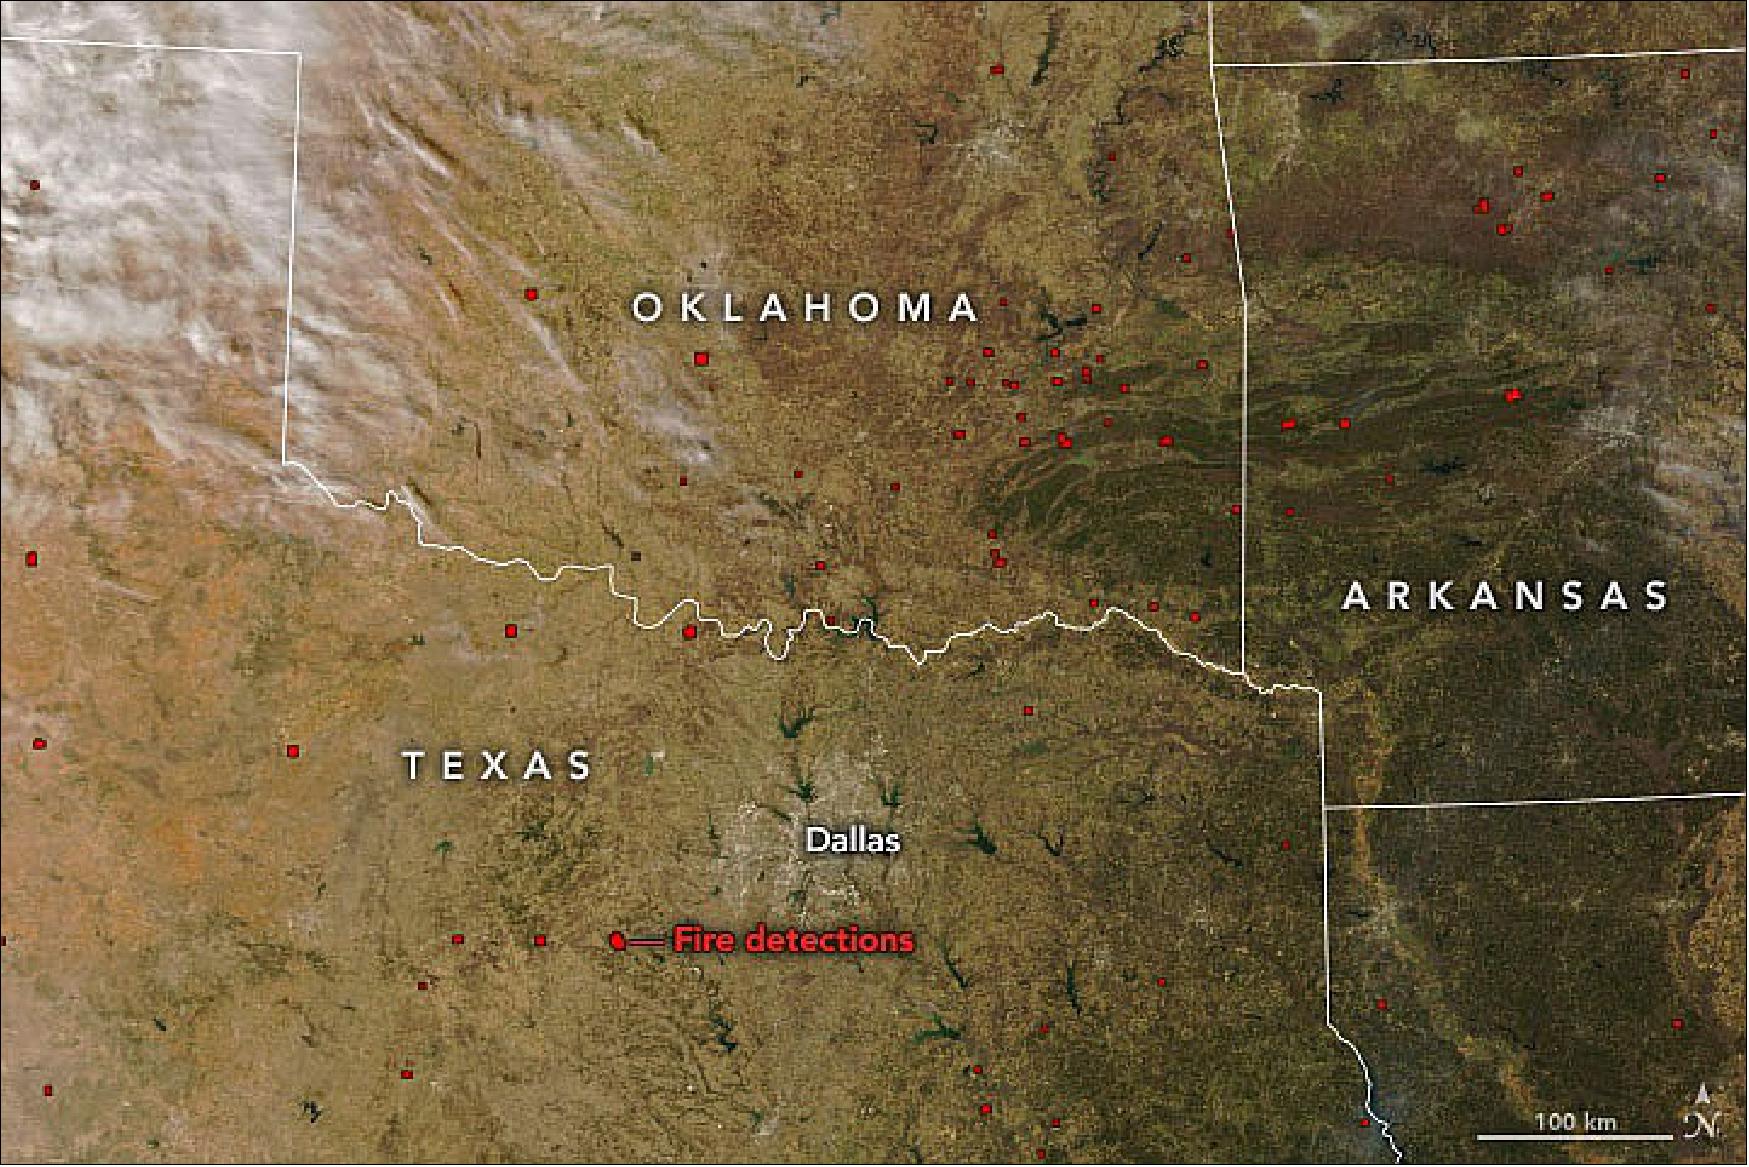 Figure 33: More than 100,000 acres have burned in a mid-March wildfire outbreak. On March 20, 2022, the MODIS instrument on NASA’s Aqua satellite acquired images of fires scattered across the Southern Plains of the United States. The natural-color image above is overlaid with red boxes indicating locations where MODIS detected heat signatures indicative of fire (image credit: NASA Earth Observatory images by Joshua Stevens, using MODIS data from NASA EOSDIS LANCE and GIBS/Worldview, and data from the Fire Information for Resource Management System (FIRMS). Story by Michael Carlowicz)